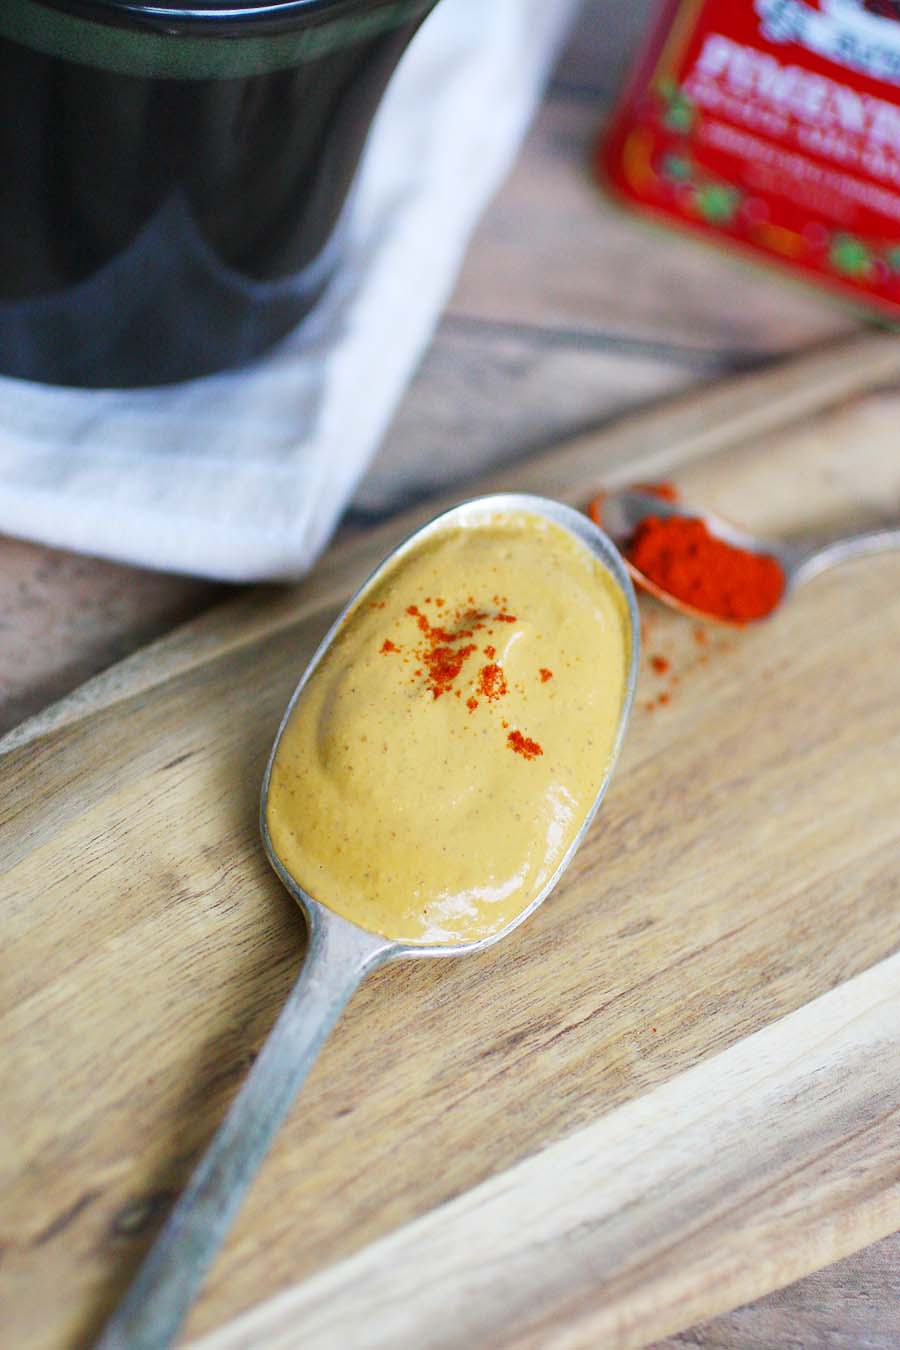 A spoon full of cream sitting on a wooden board with paprika dusted on top.